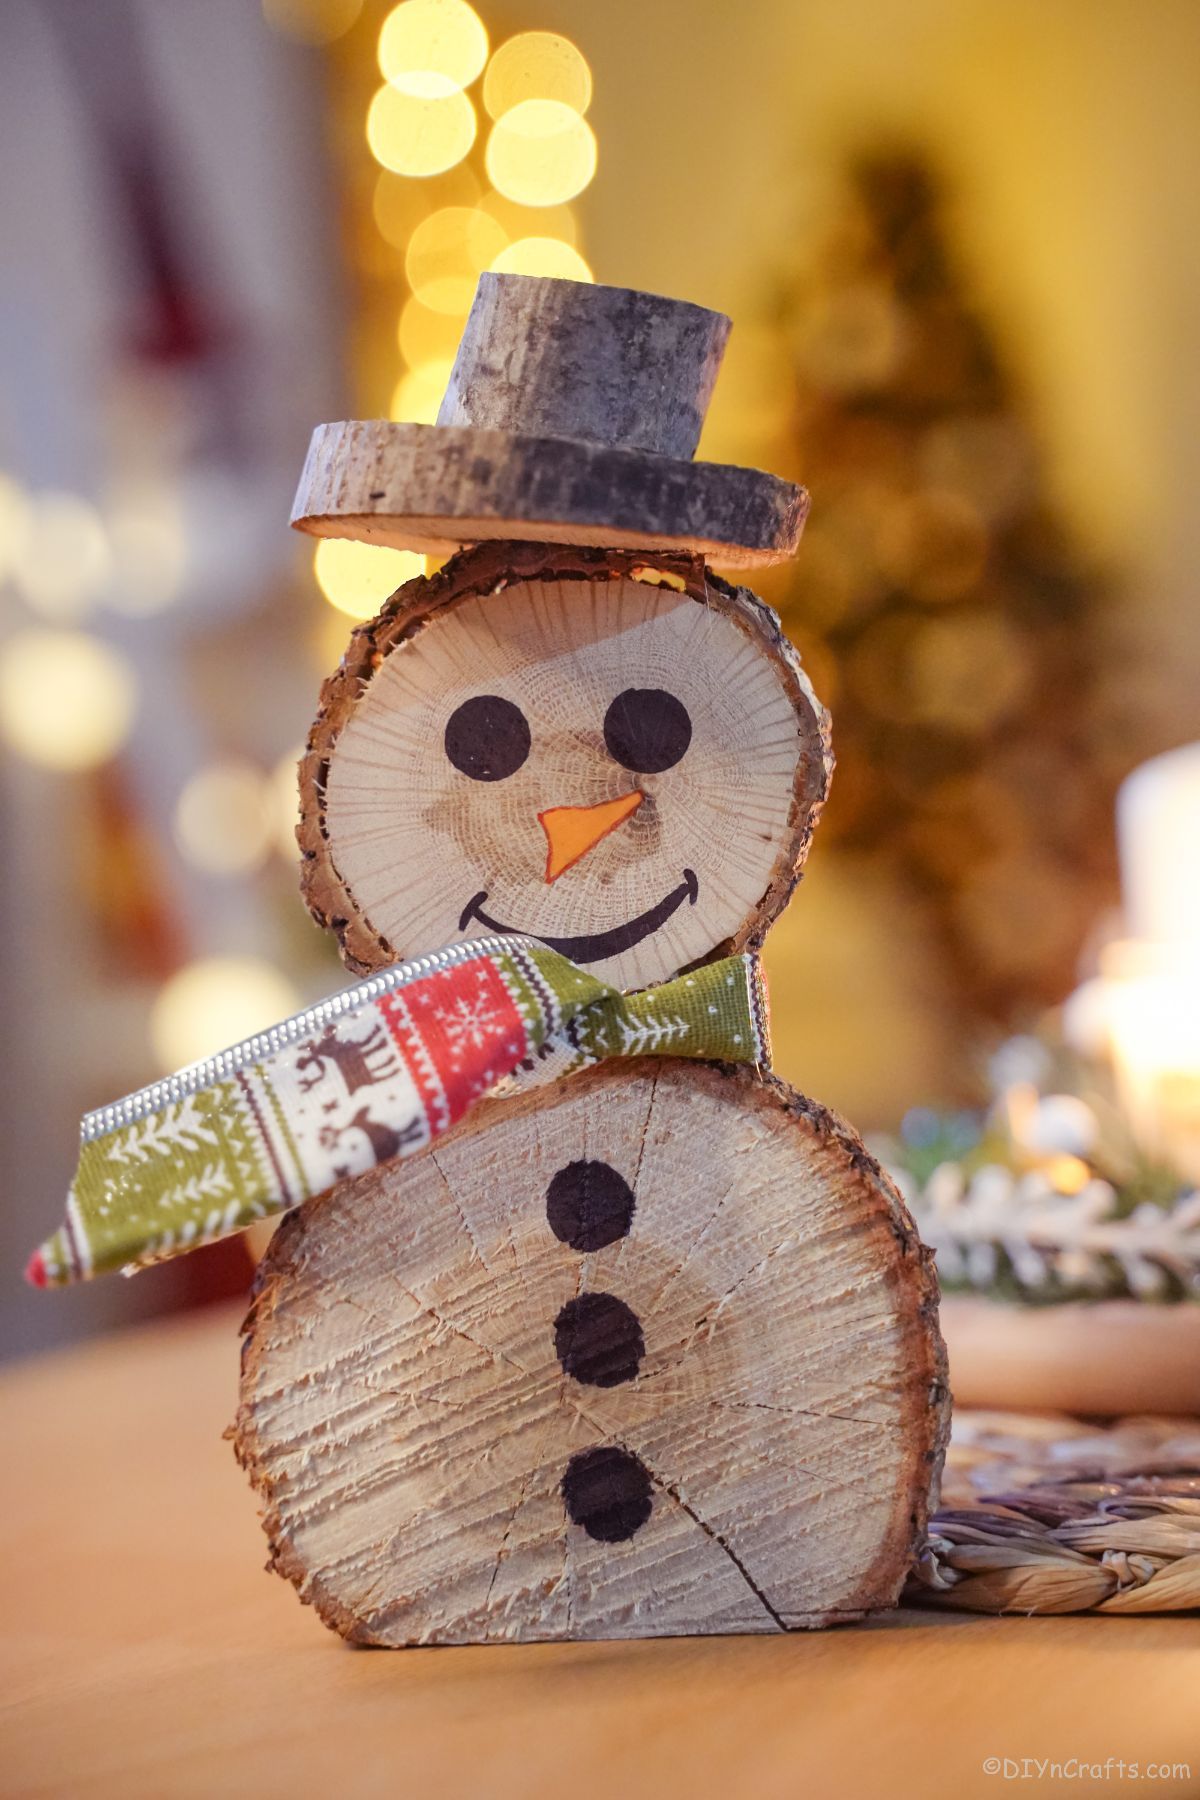 wooden slice snowman on wooden table with green holiday scarf